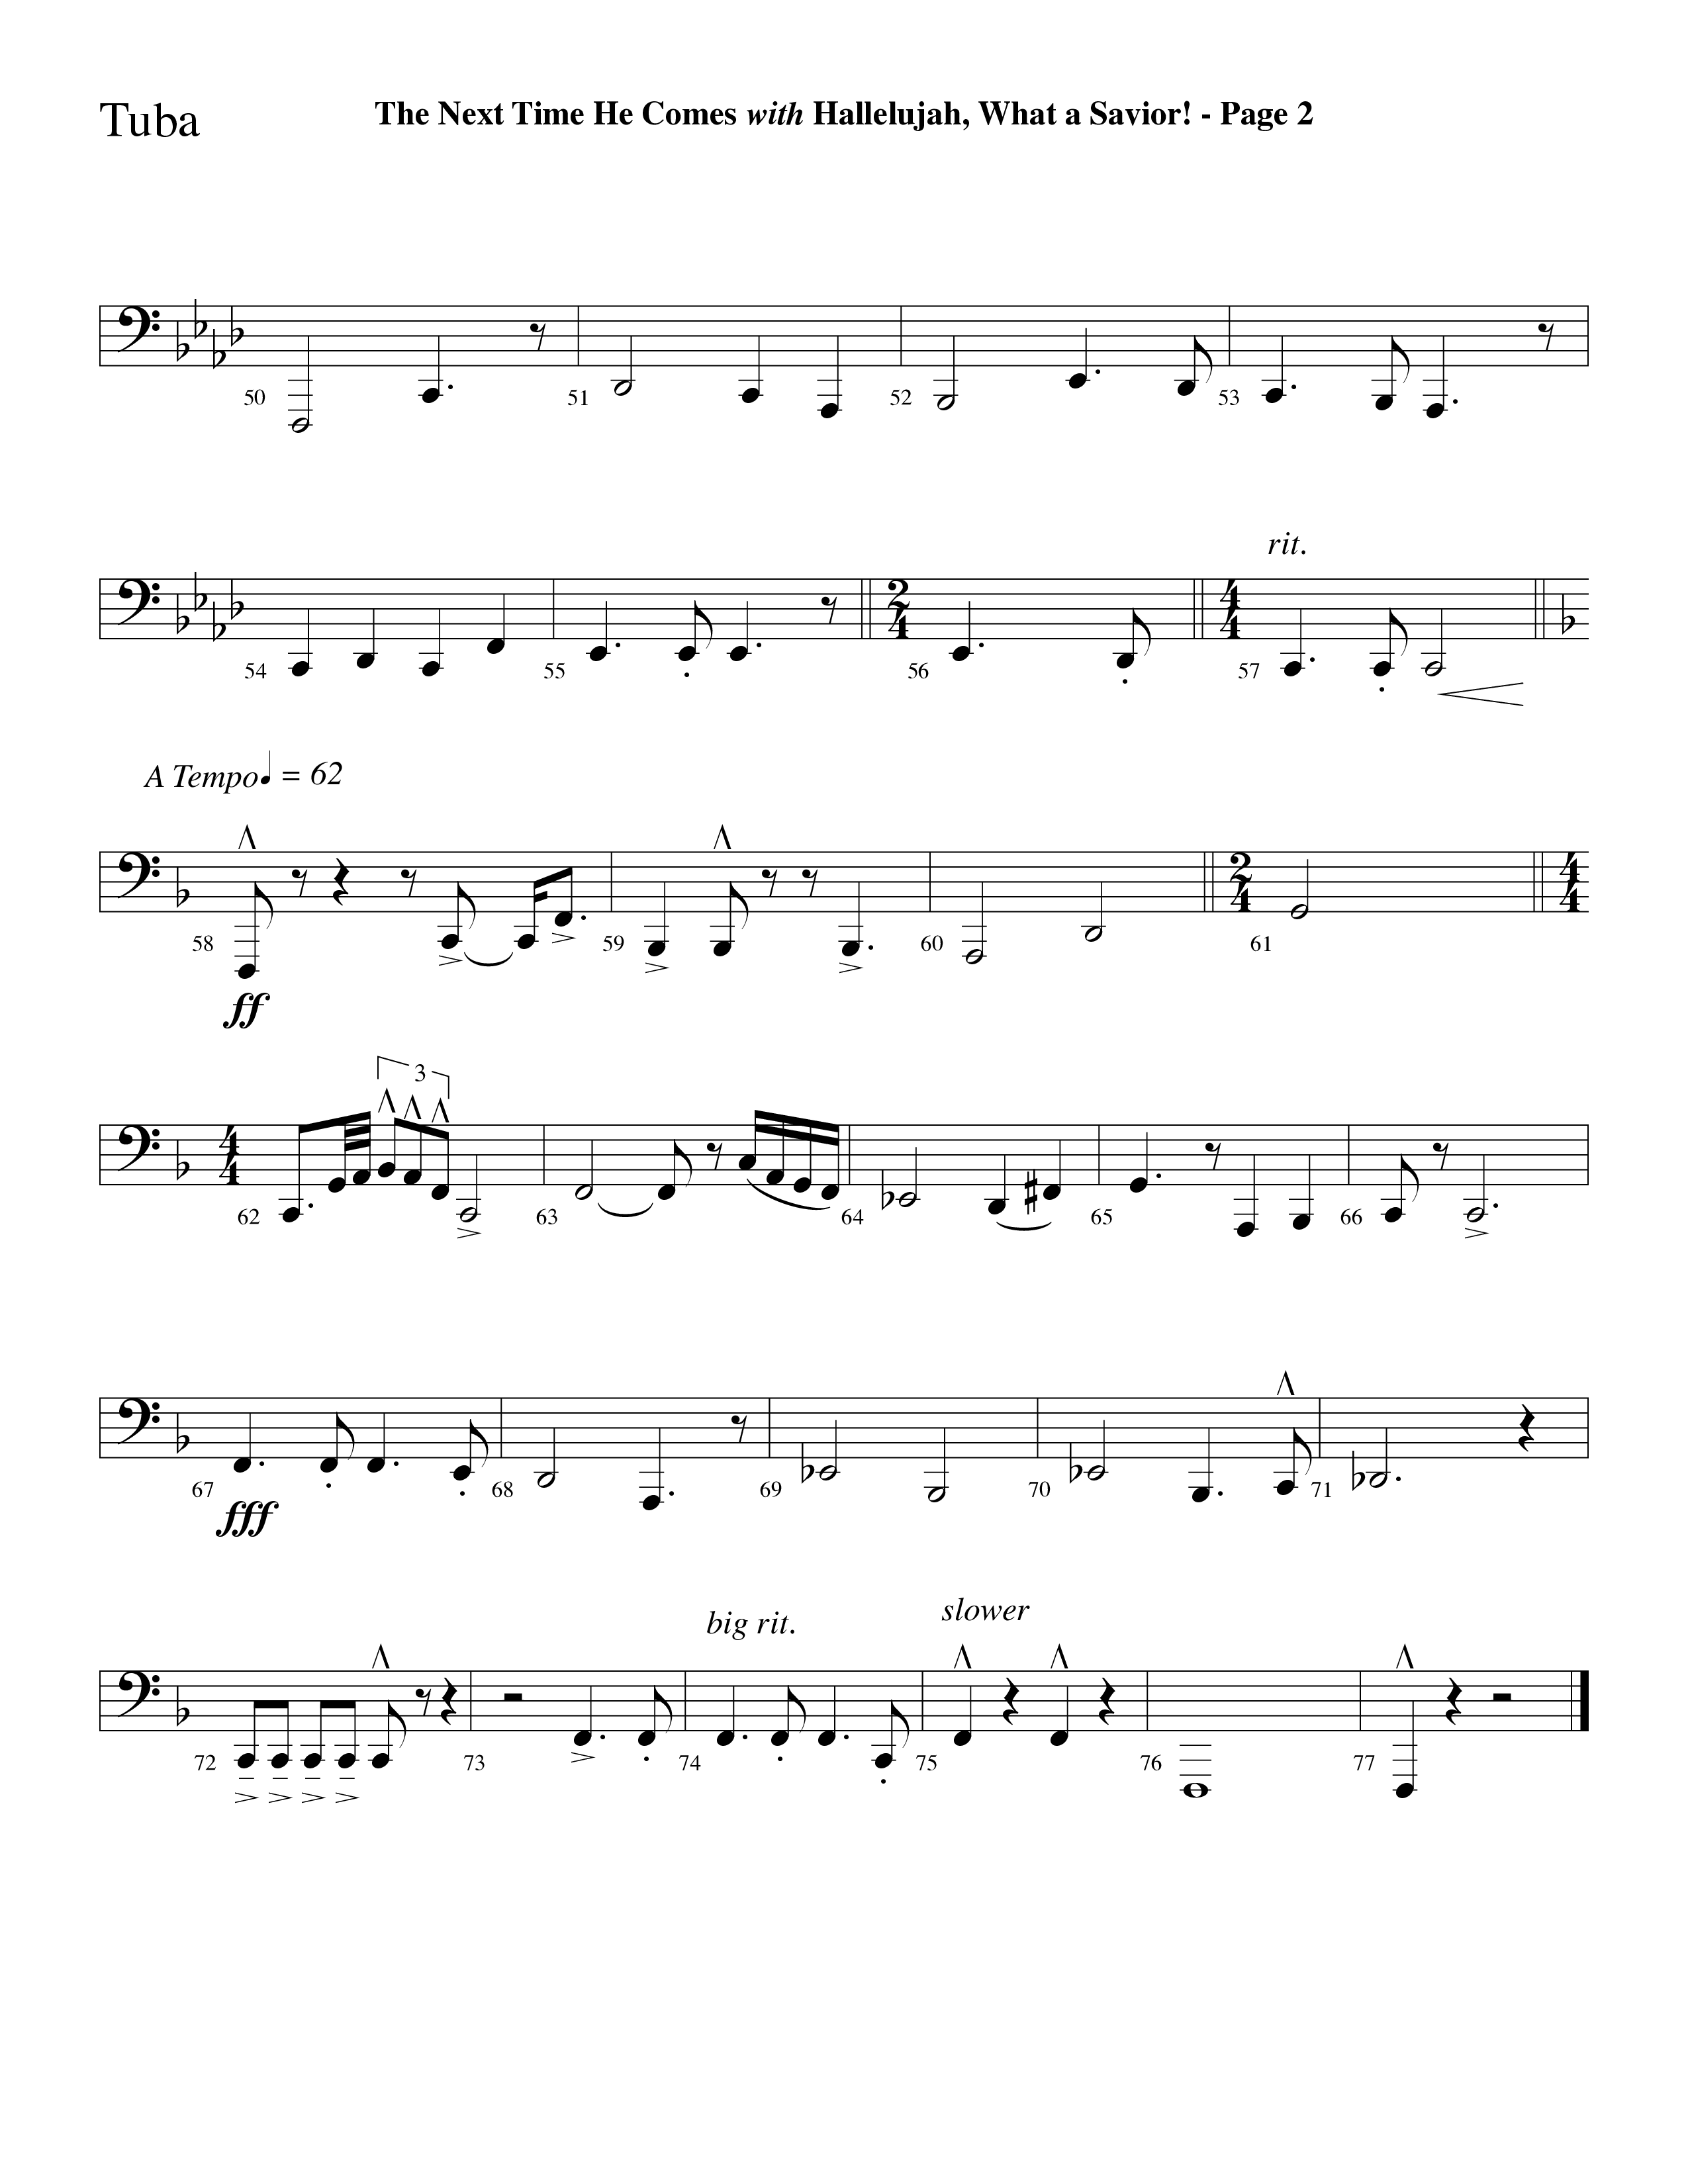 The Next Time He Comes (with Hallelujah What A Savior) (Choral Anthem SATB) Tuba (Lifeway Choral / Arr. Dave Williamson)